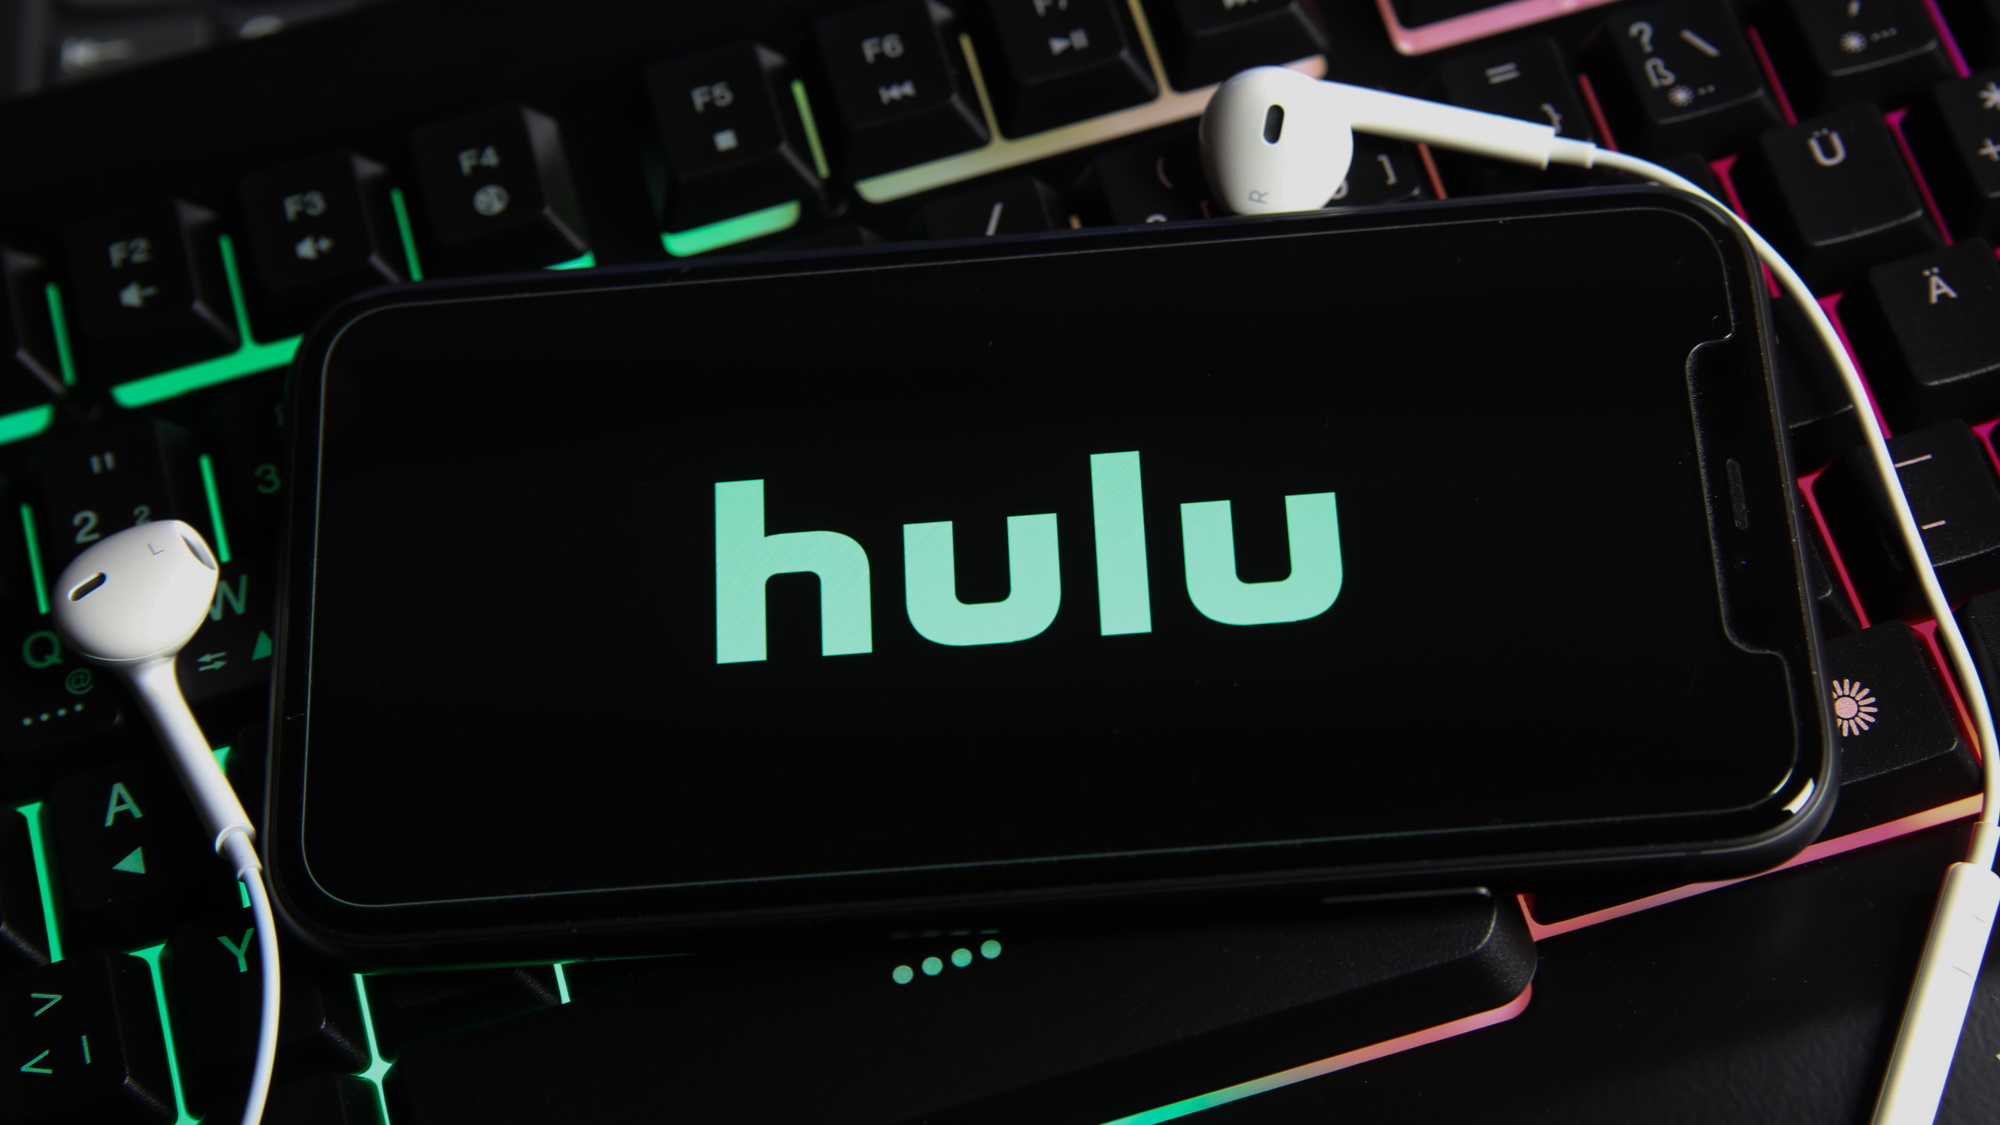 Hulu plans and prices best deals, bundles in 2023, and how to sign up TechRadar